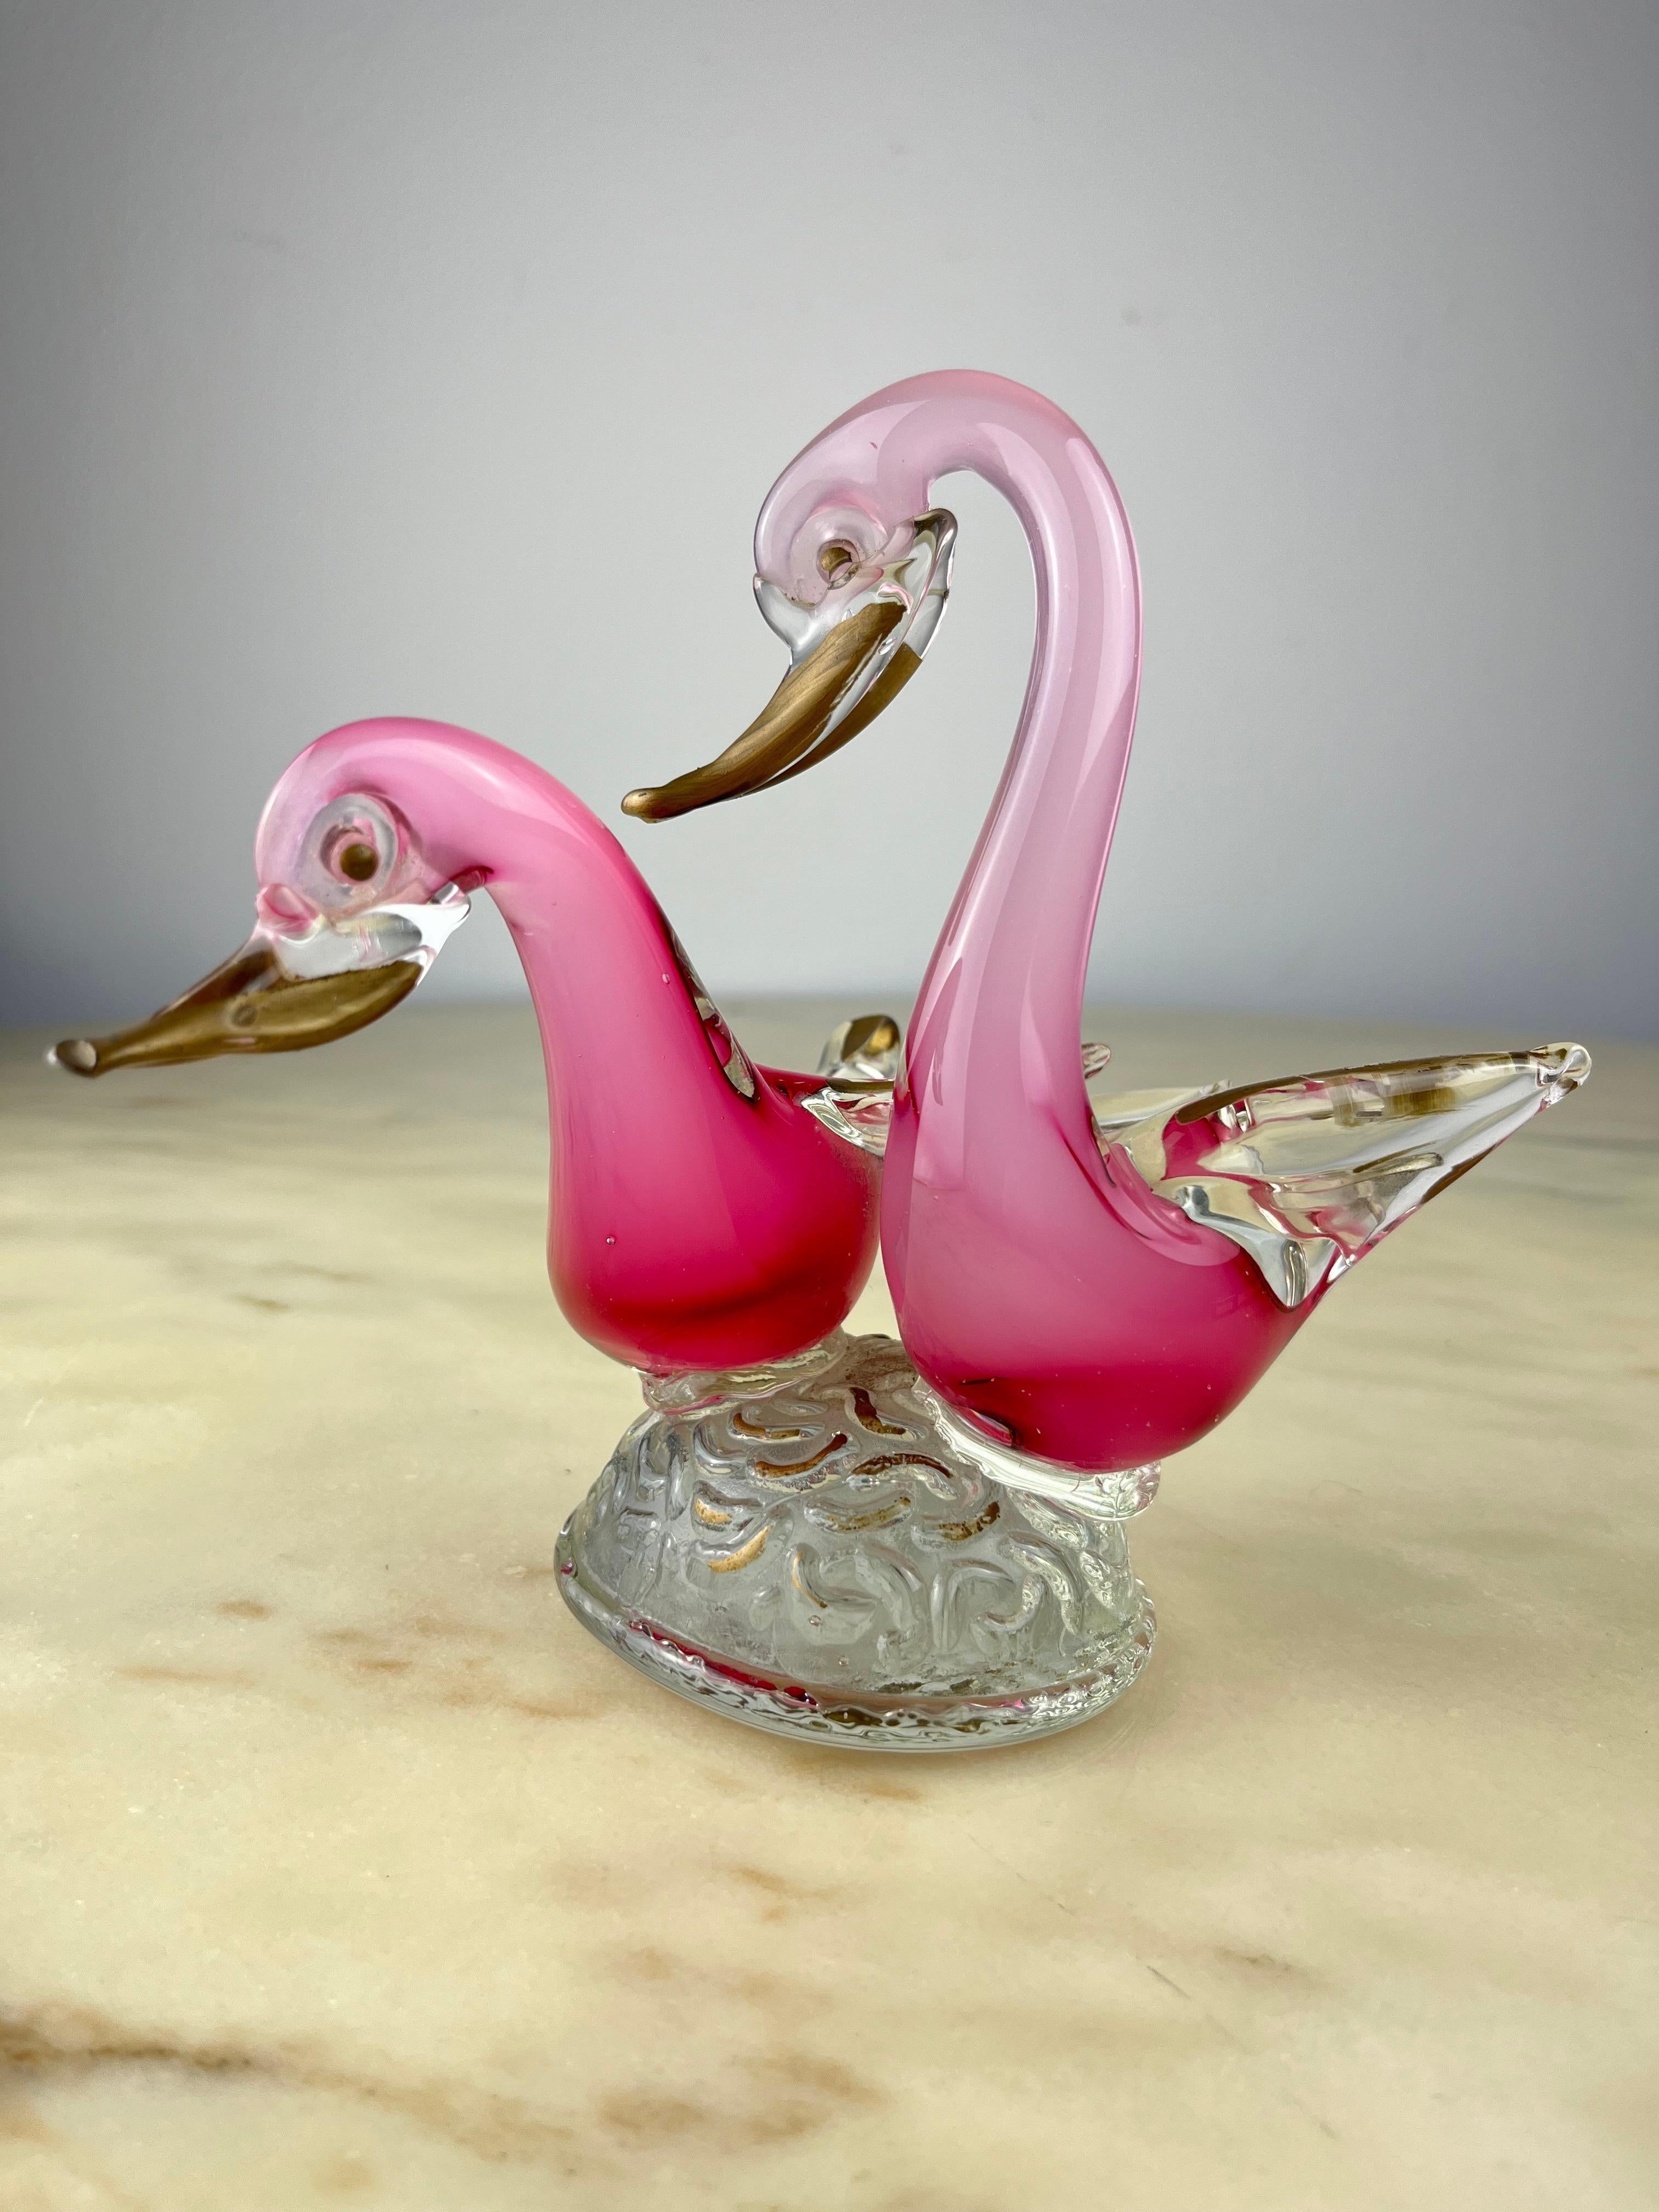 Murano glass swans, Italy, 1960s.
Family items, bought by my great-grandparents during a pleasure trip. Intact. Note the large dimensions. Typical workmanship of those years, note the air bubbles inside, a piece of great artistic value.